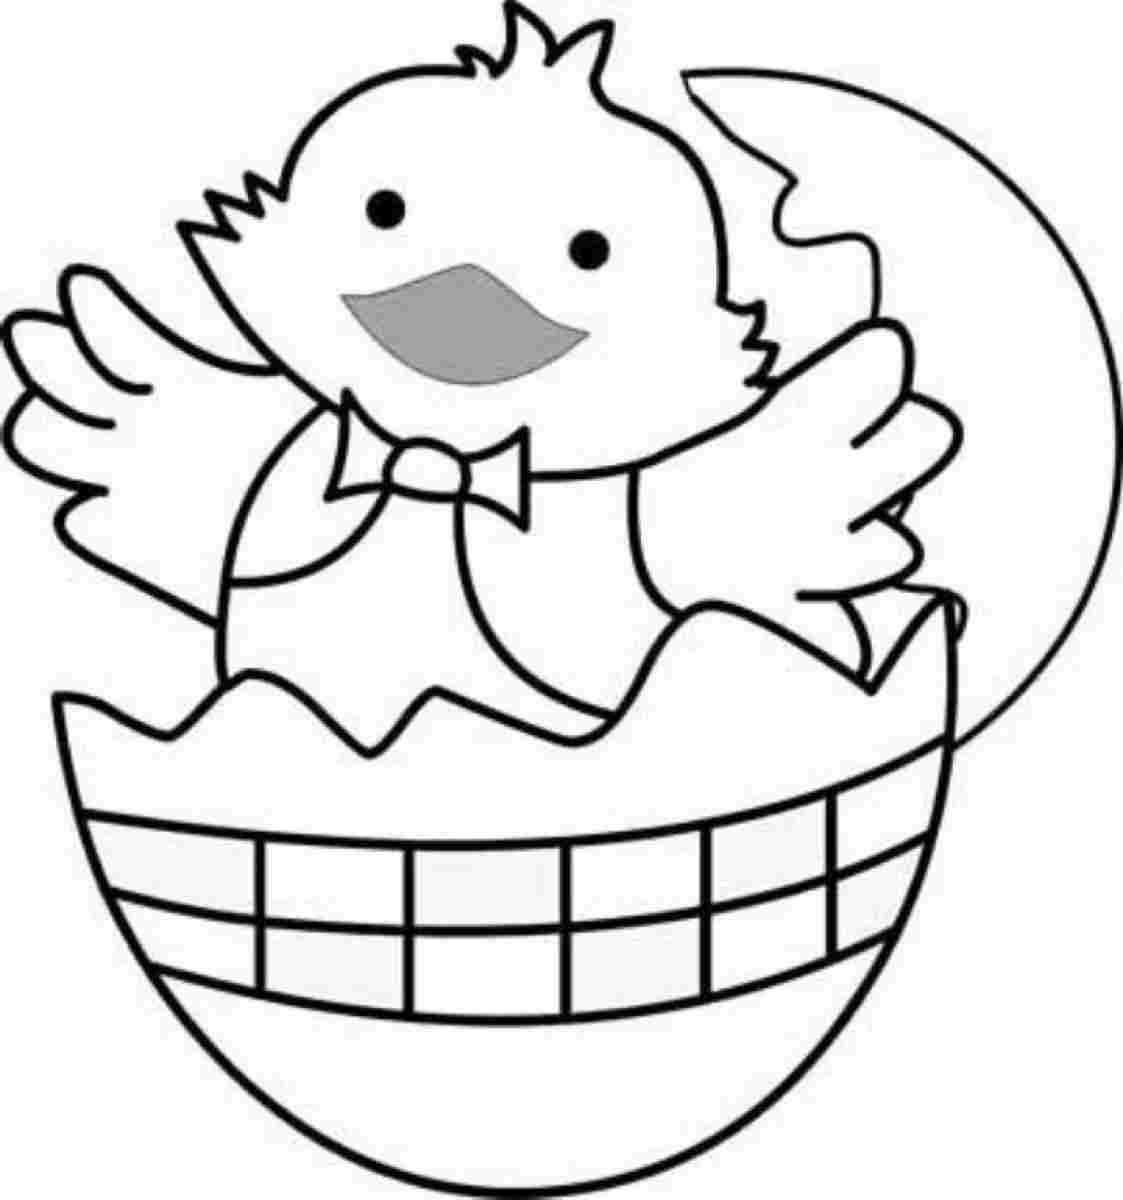 Preschool Coloring Sheets Of A Chicken Free Printable
 Chicken Coloring Pages coloringsuite